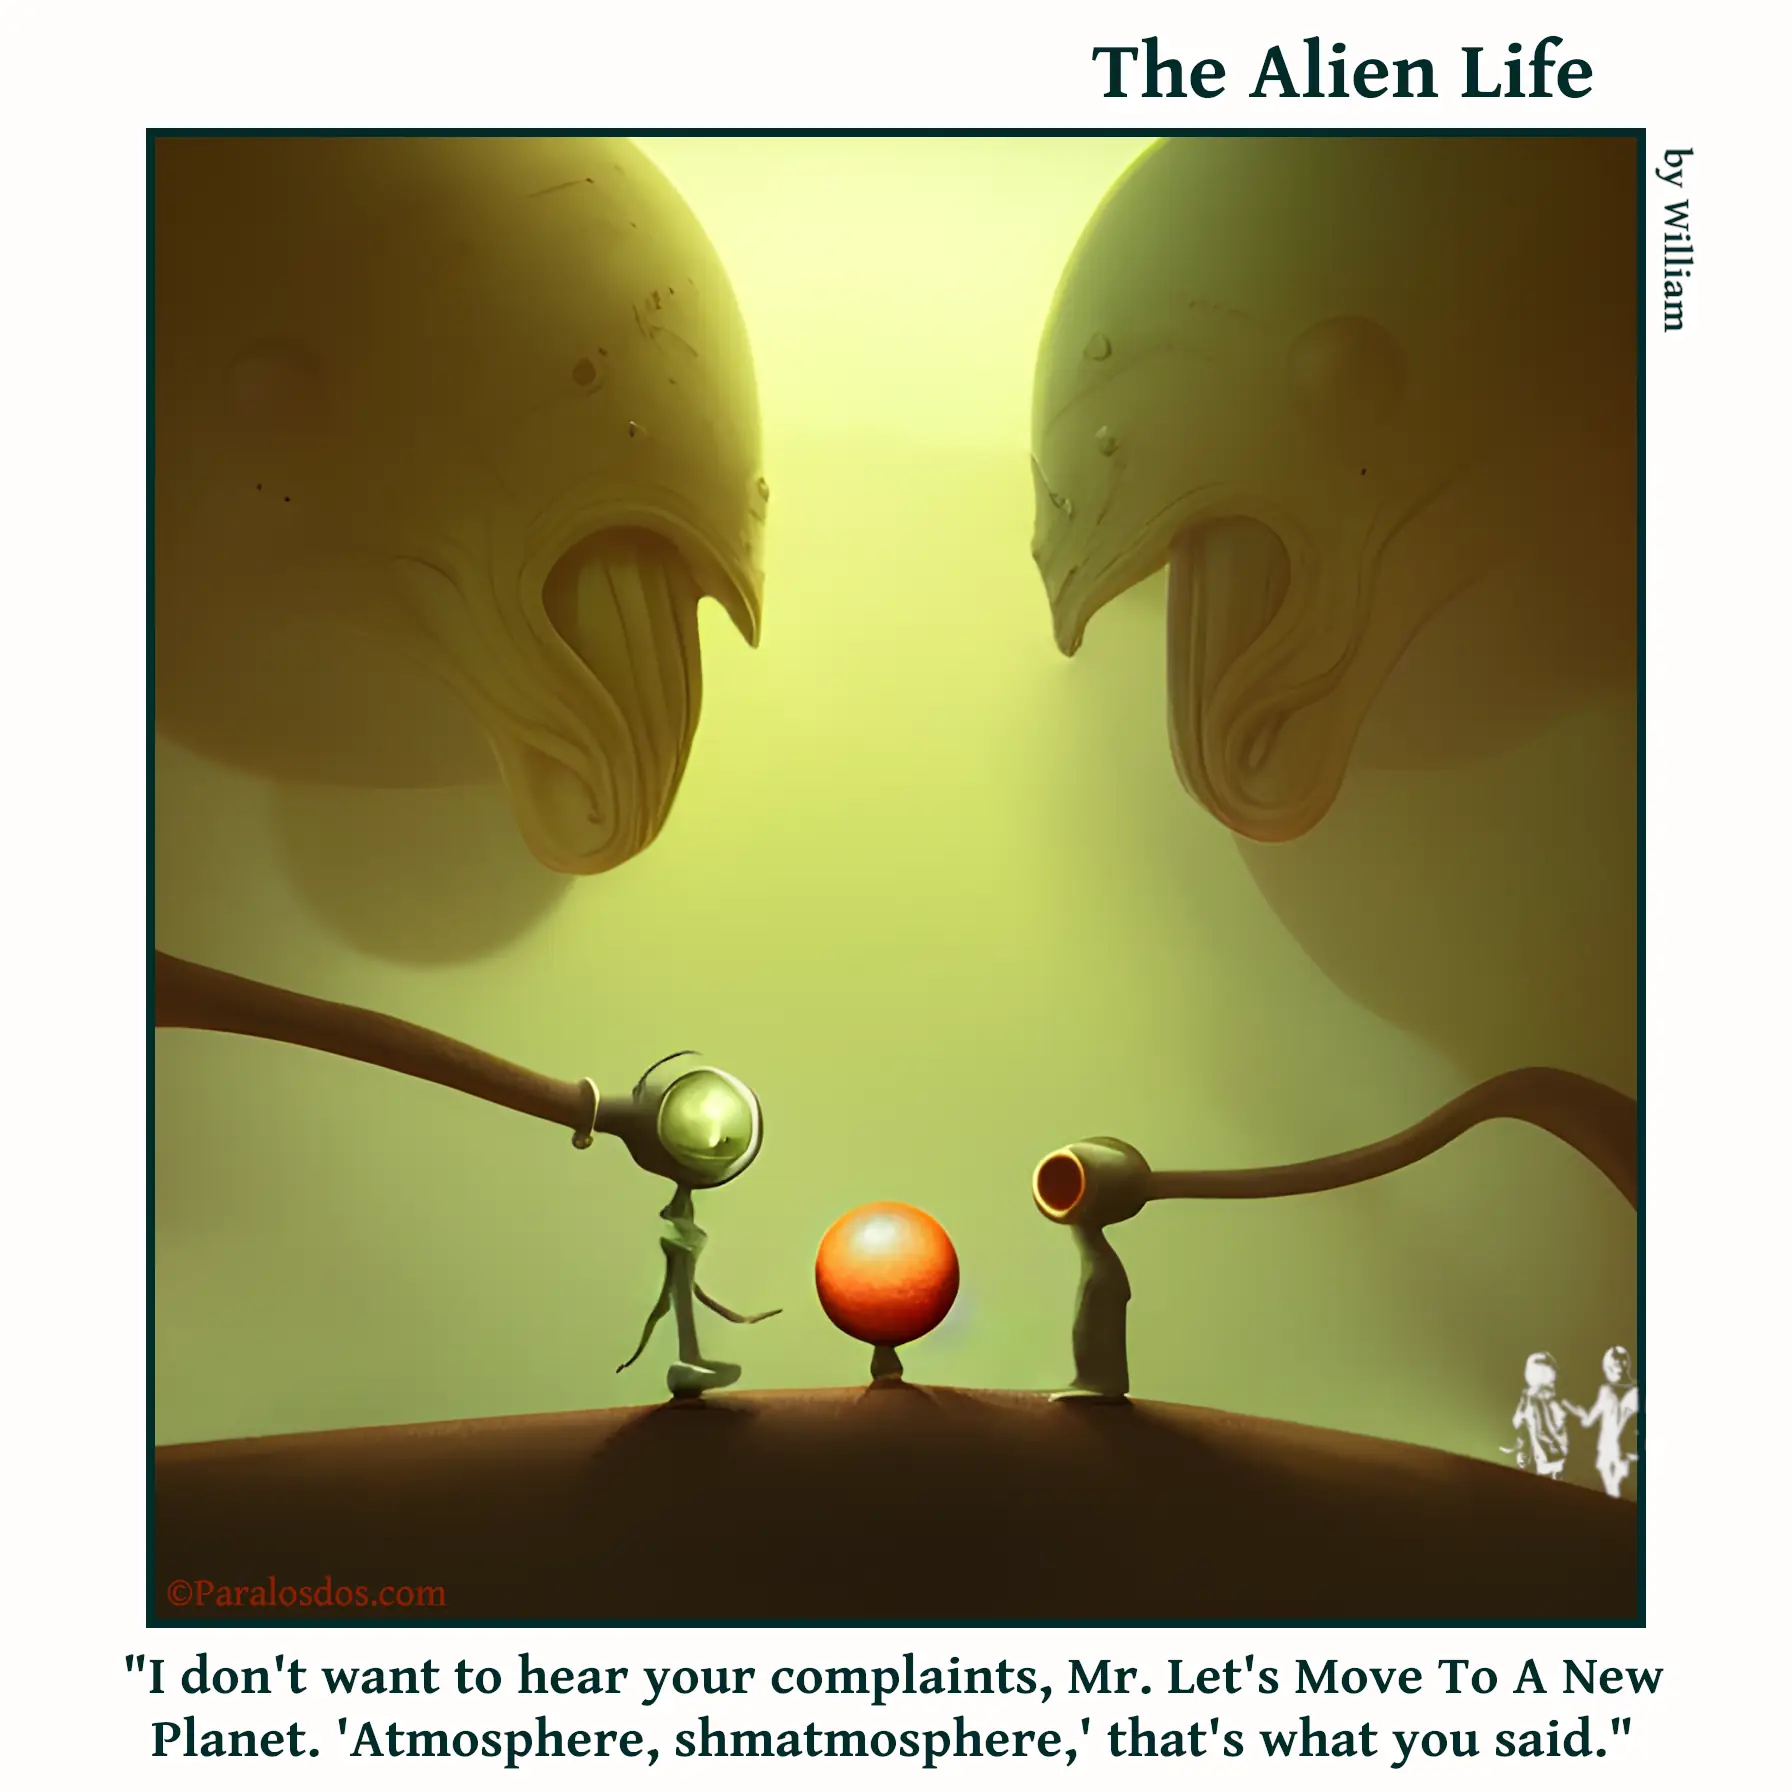 The Alien Life, one panel Comic. Two figures have met in the middle of the image. They are both wearing helmets with air being piped in through hoses attached, like tethers. The caption reads: "I don't want to hear your complaints, Mr. Let's Move To A New Planet. 'Atmosphere, shmatmosphere,' that's what you said."